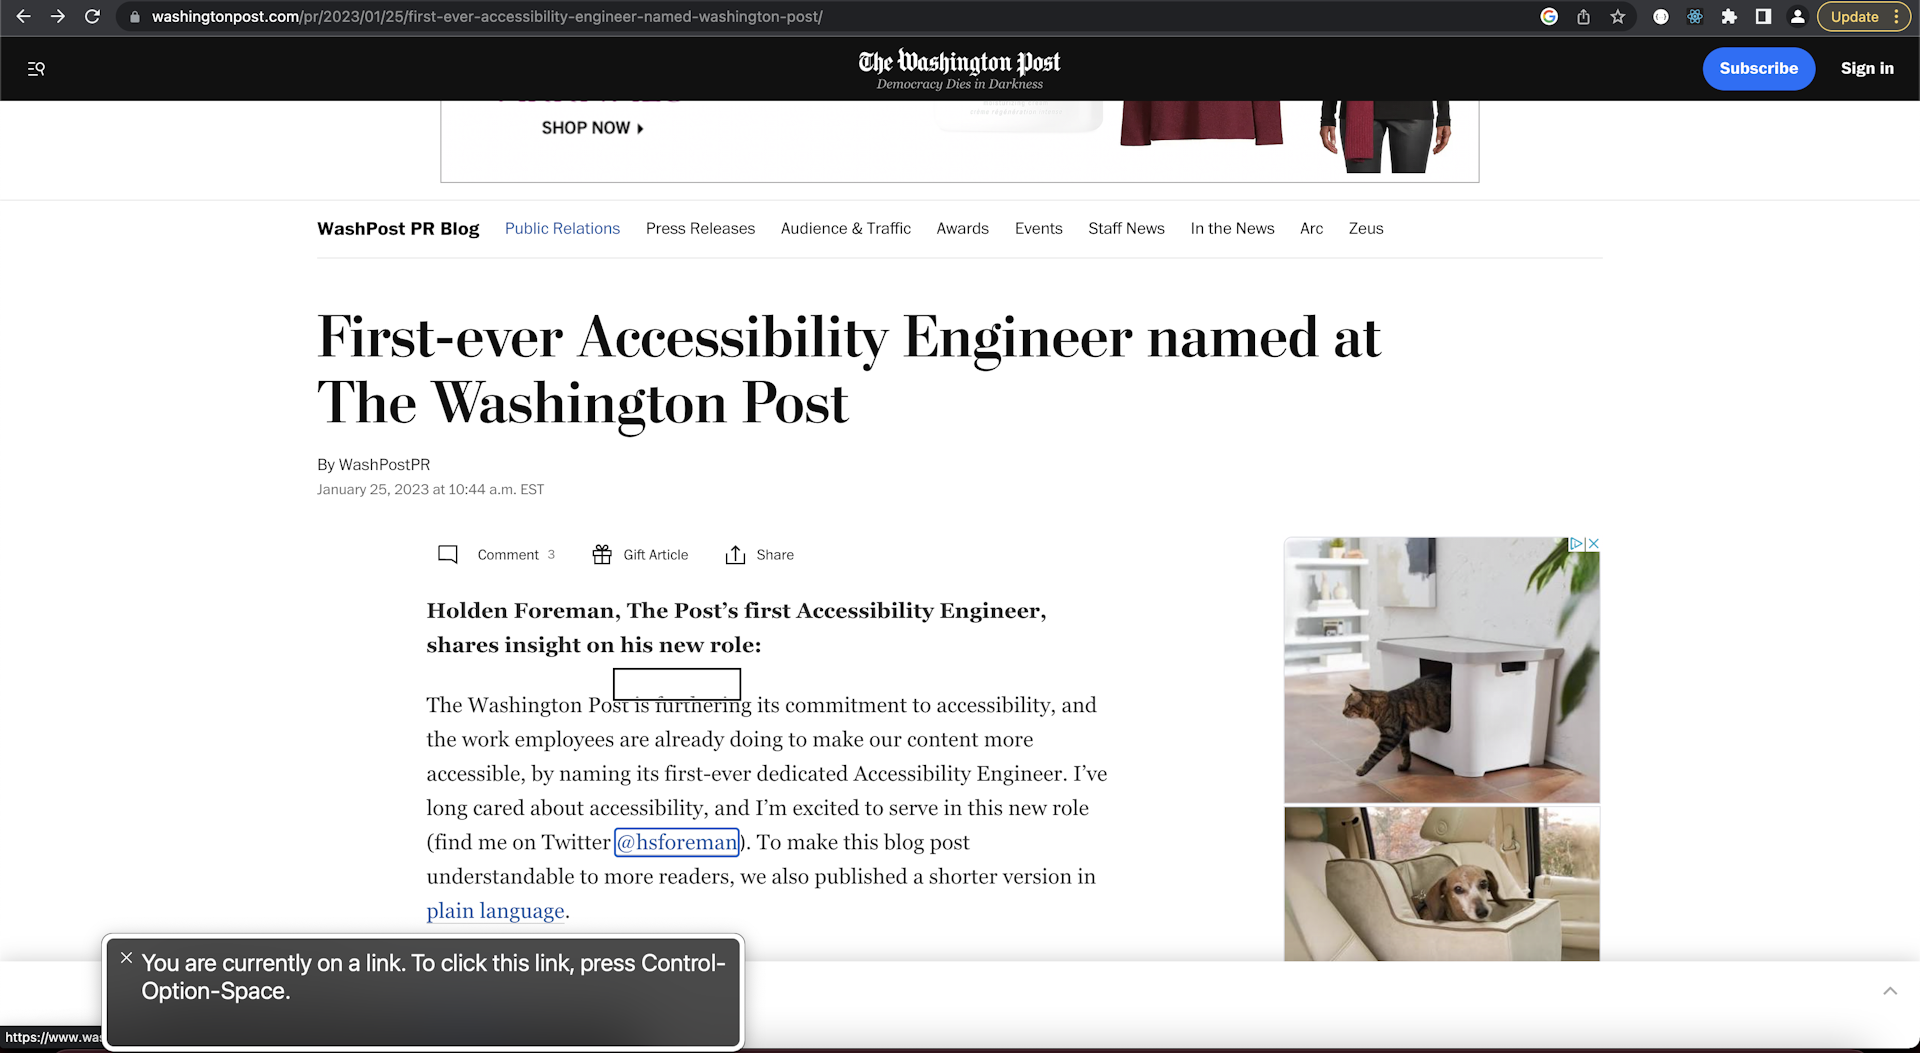 Screenshot shows VoiceOver in use on a Washington Post article. A hyperlink on the page has a blue ring around it as it is currently in focus, and a box in the bottom left corner of the screen shows the link text that VoiceOver is reading aloud to the user.